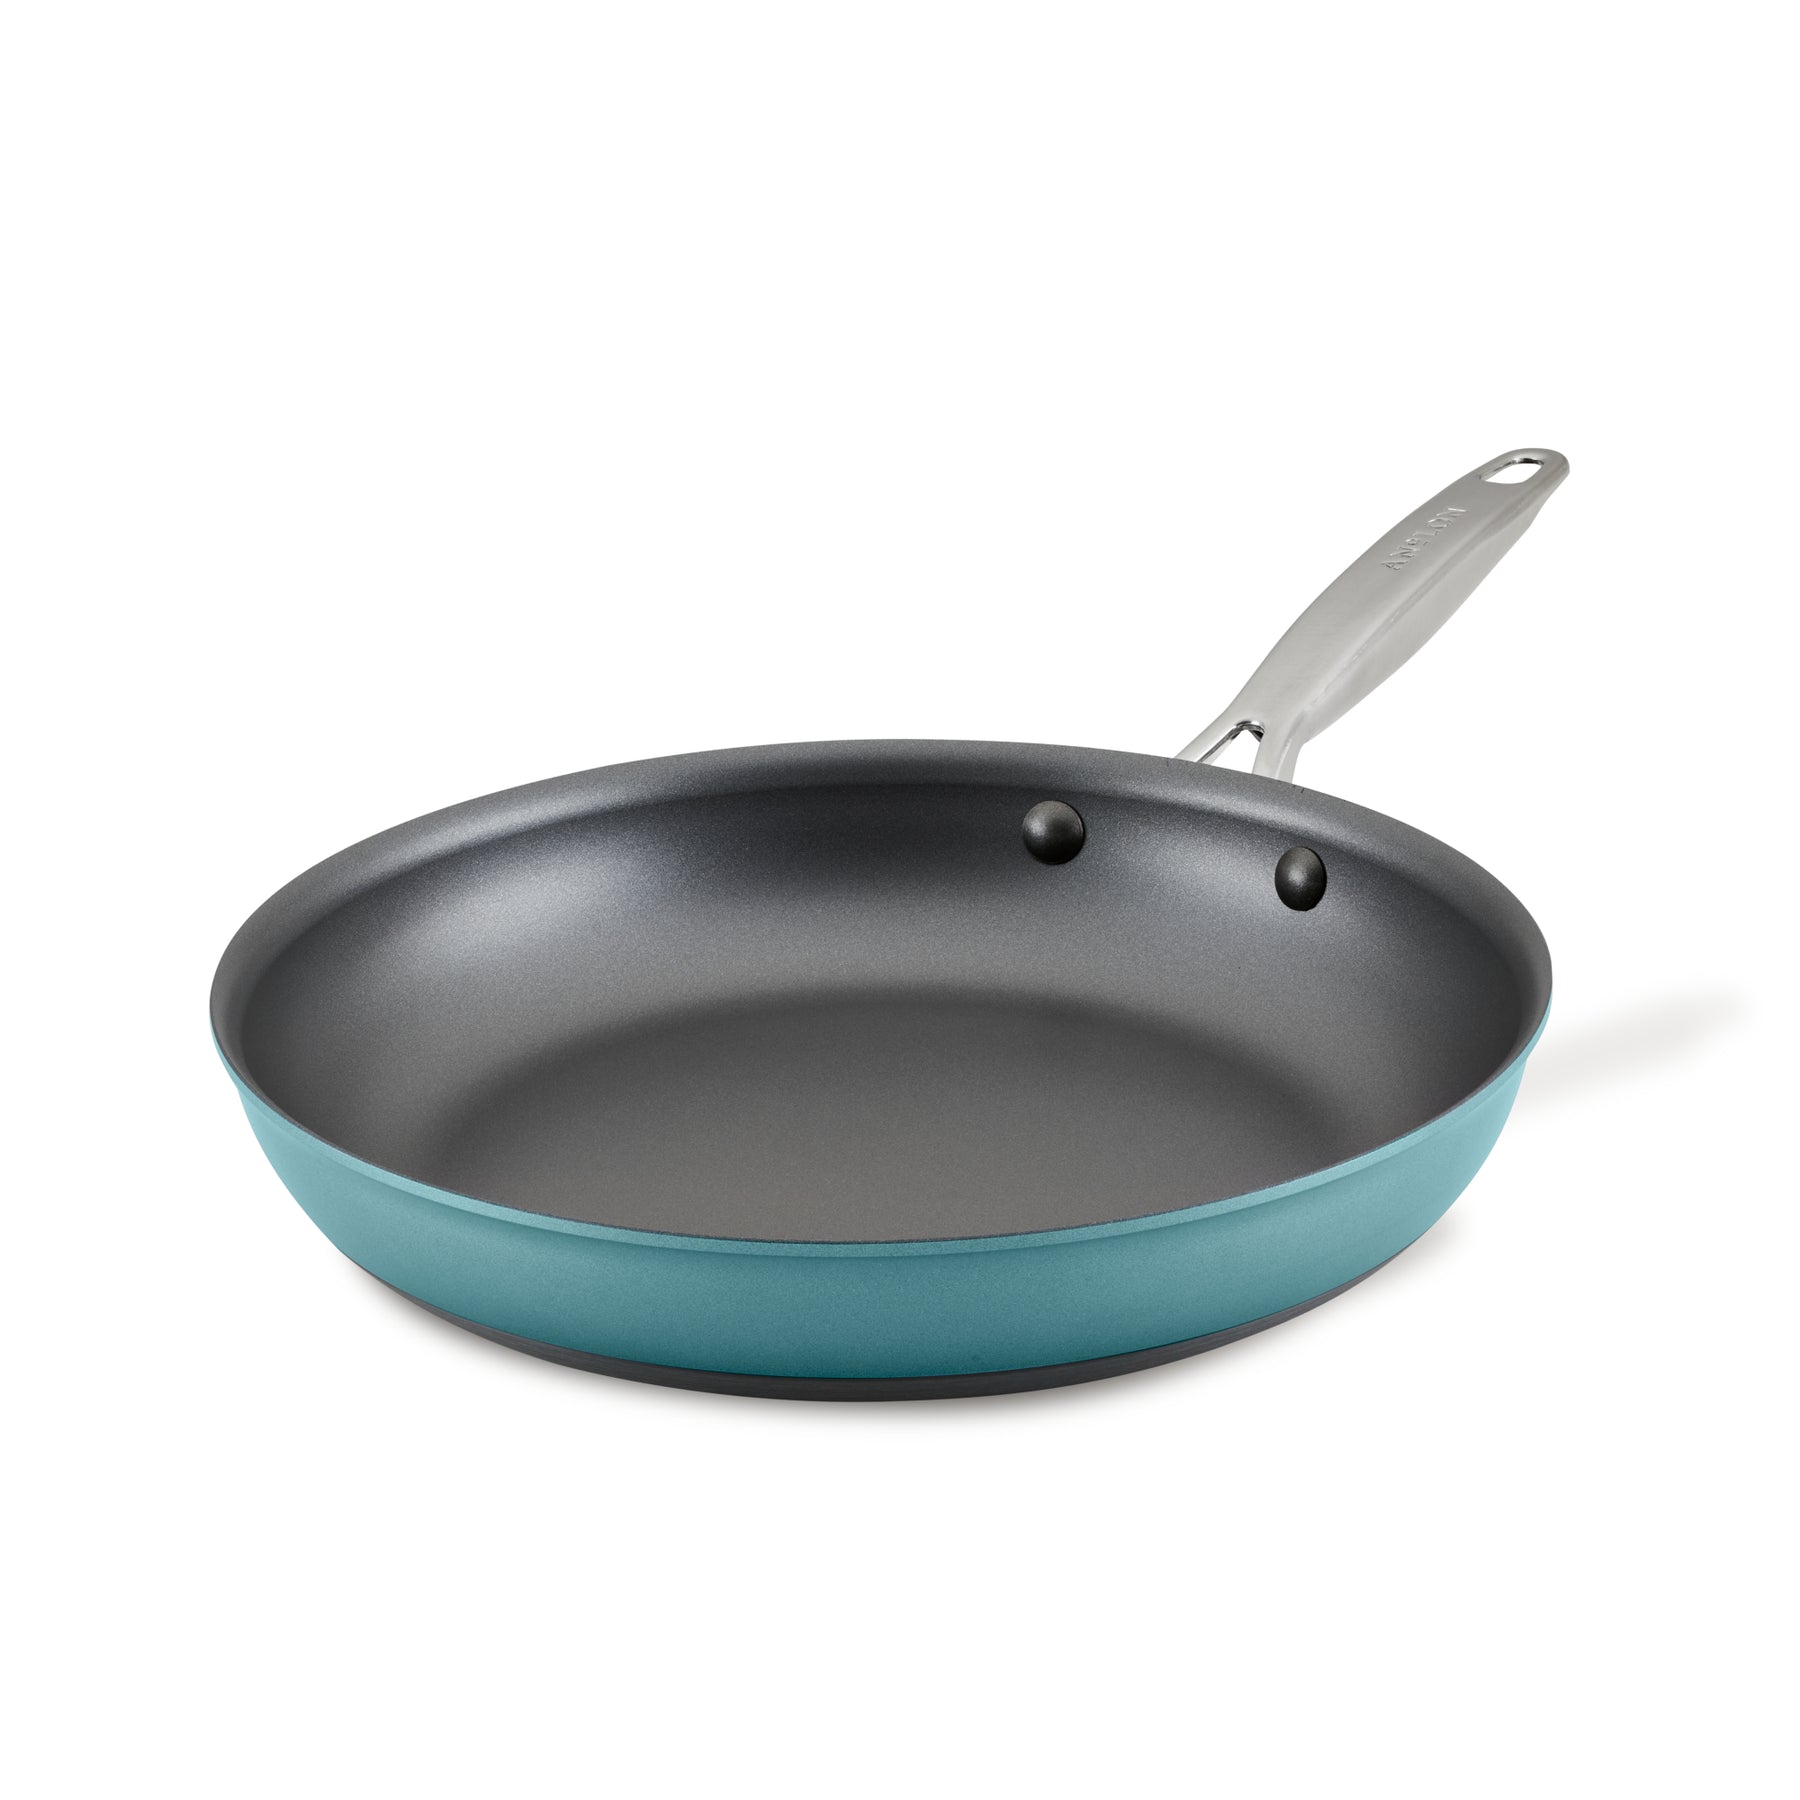 Anodized Advanced Healthy Ceramic Nonstick, 12 Frying Pan Skillet